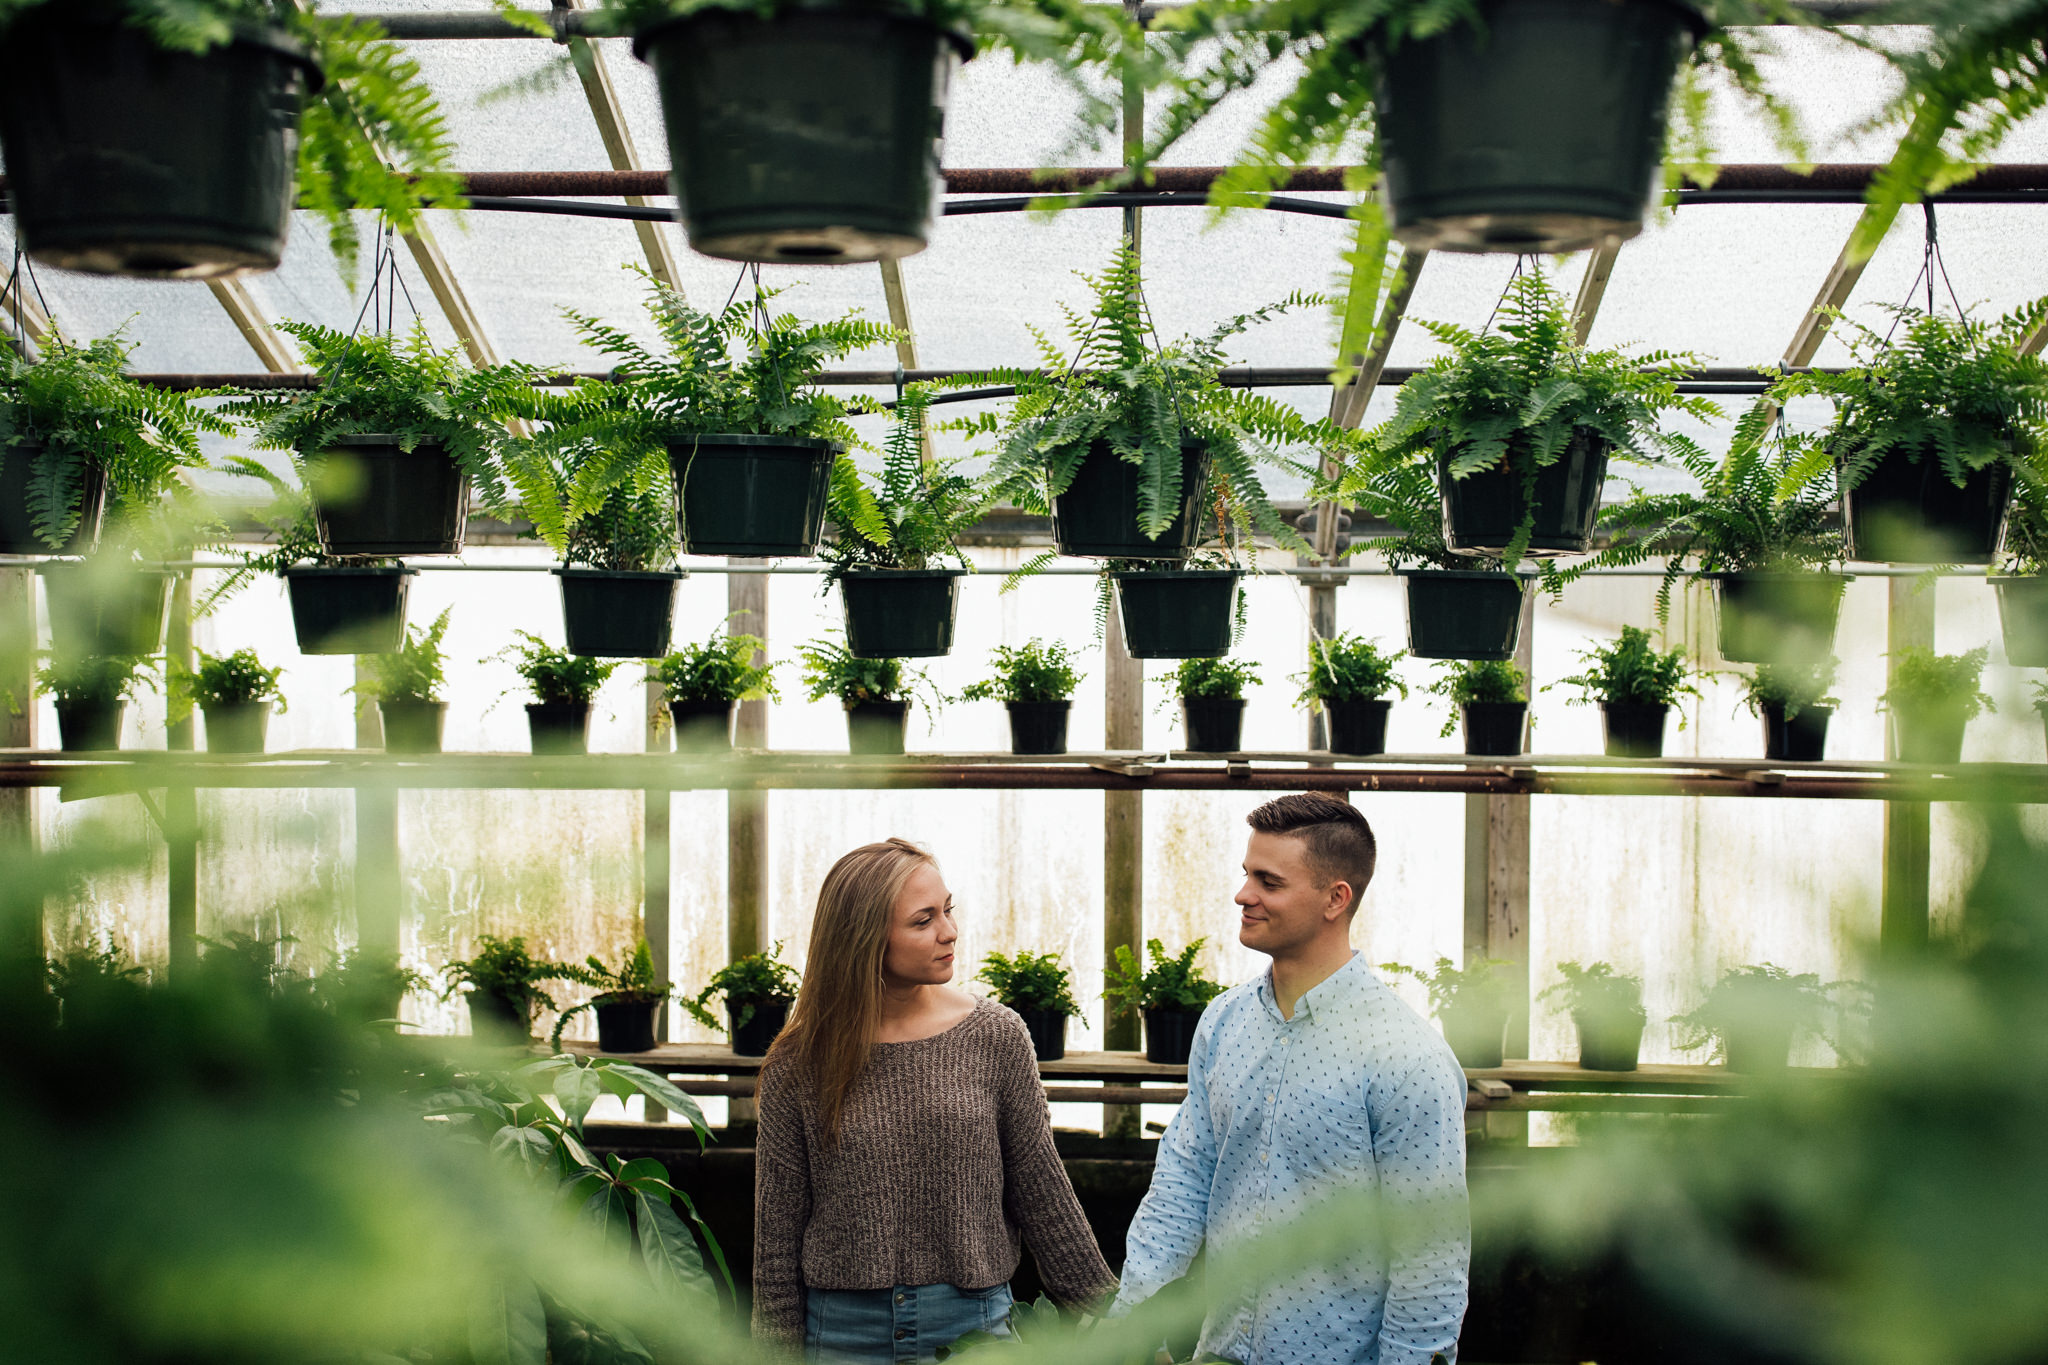 memphis-engagement-photographer-thewarmtharoundyou-greenhouse-engagement-pictures (20 of 118).jpg